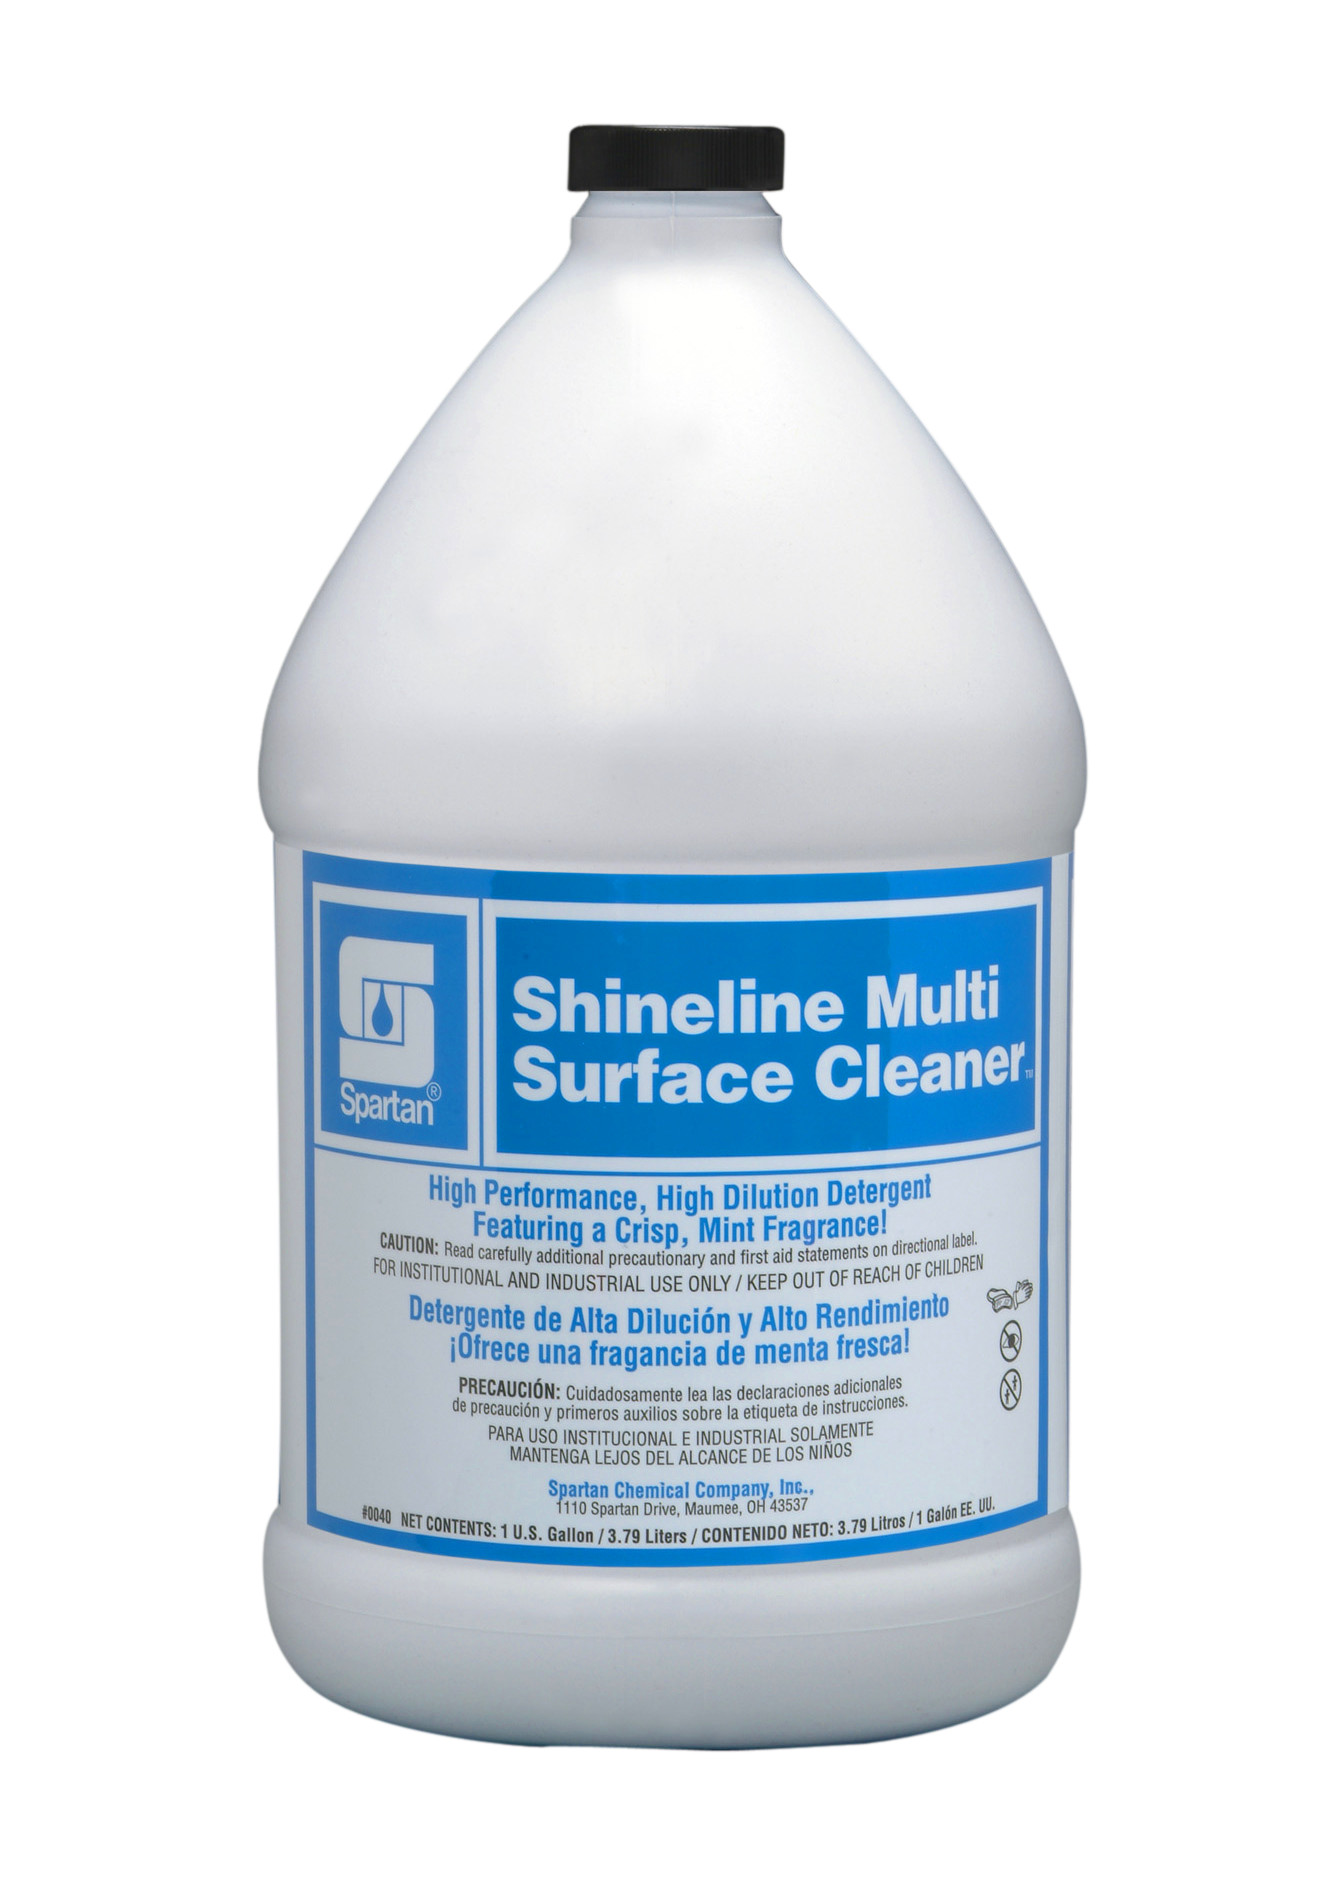 Spartan Chemical Company Shineline Multi Surface Cleaner, 1 Gallon Jug